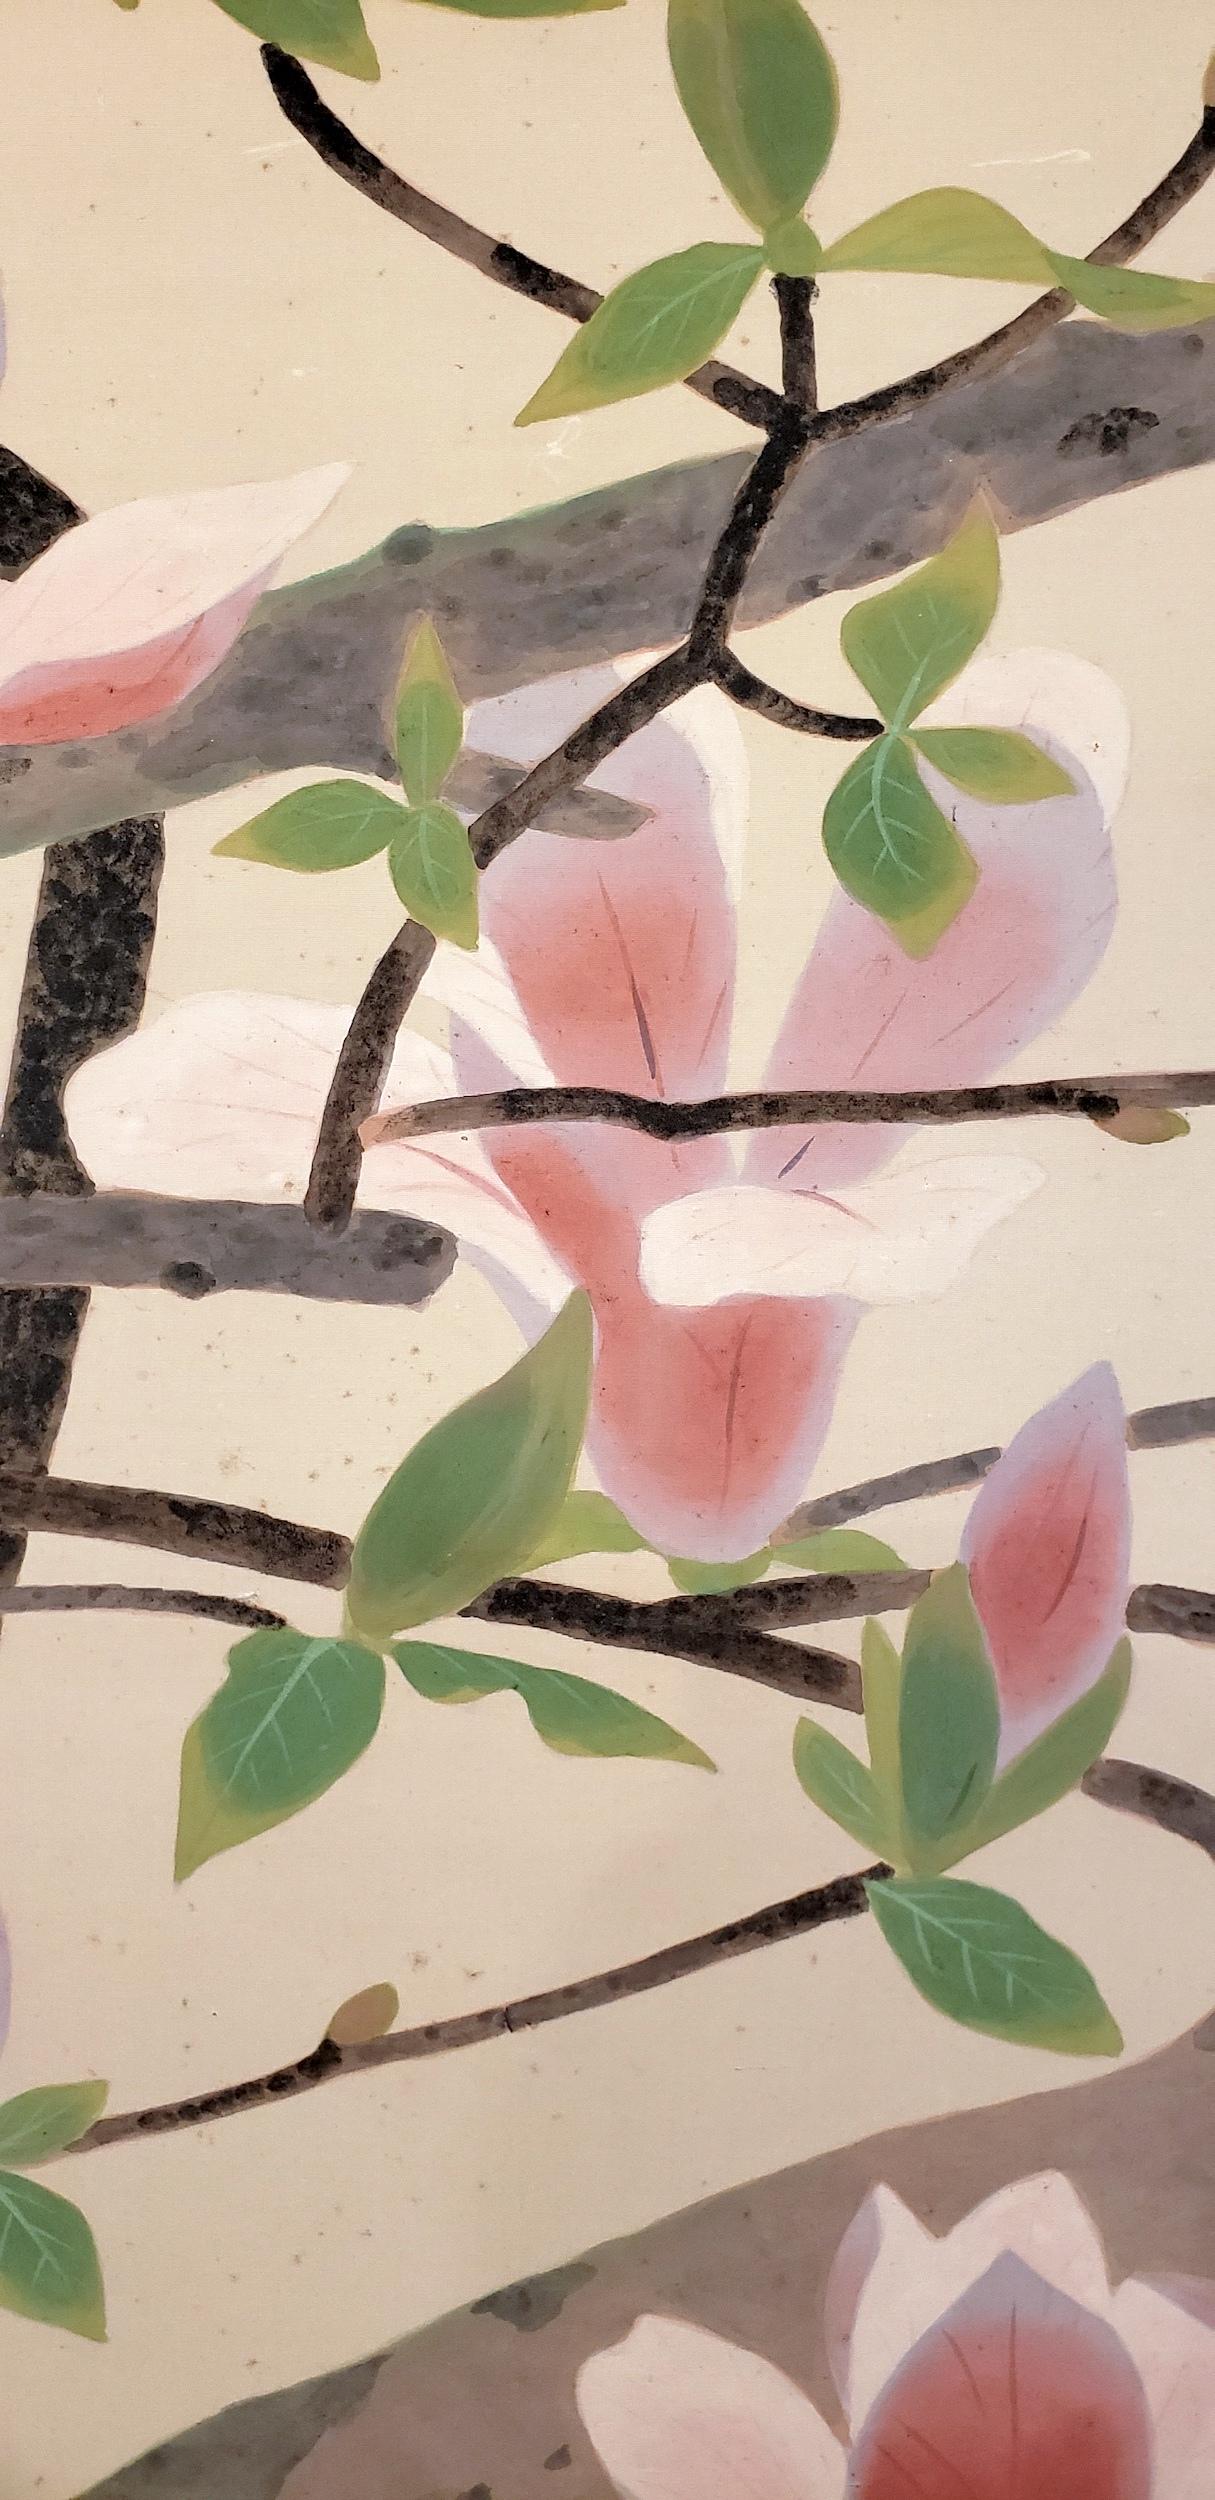 Japanese two-panel screen: Pink and white magnolias in early bloom, Taisho period (1912-1926) painting of Japanese magnolia tree branches as the flowers are opening. This type of magnolia blooms in late winter/early spring and is one of the first